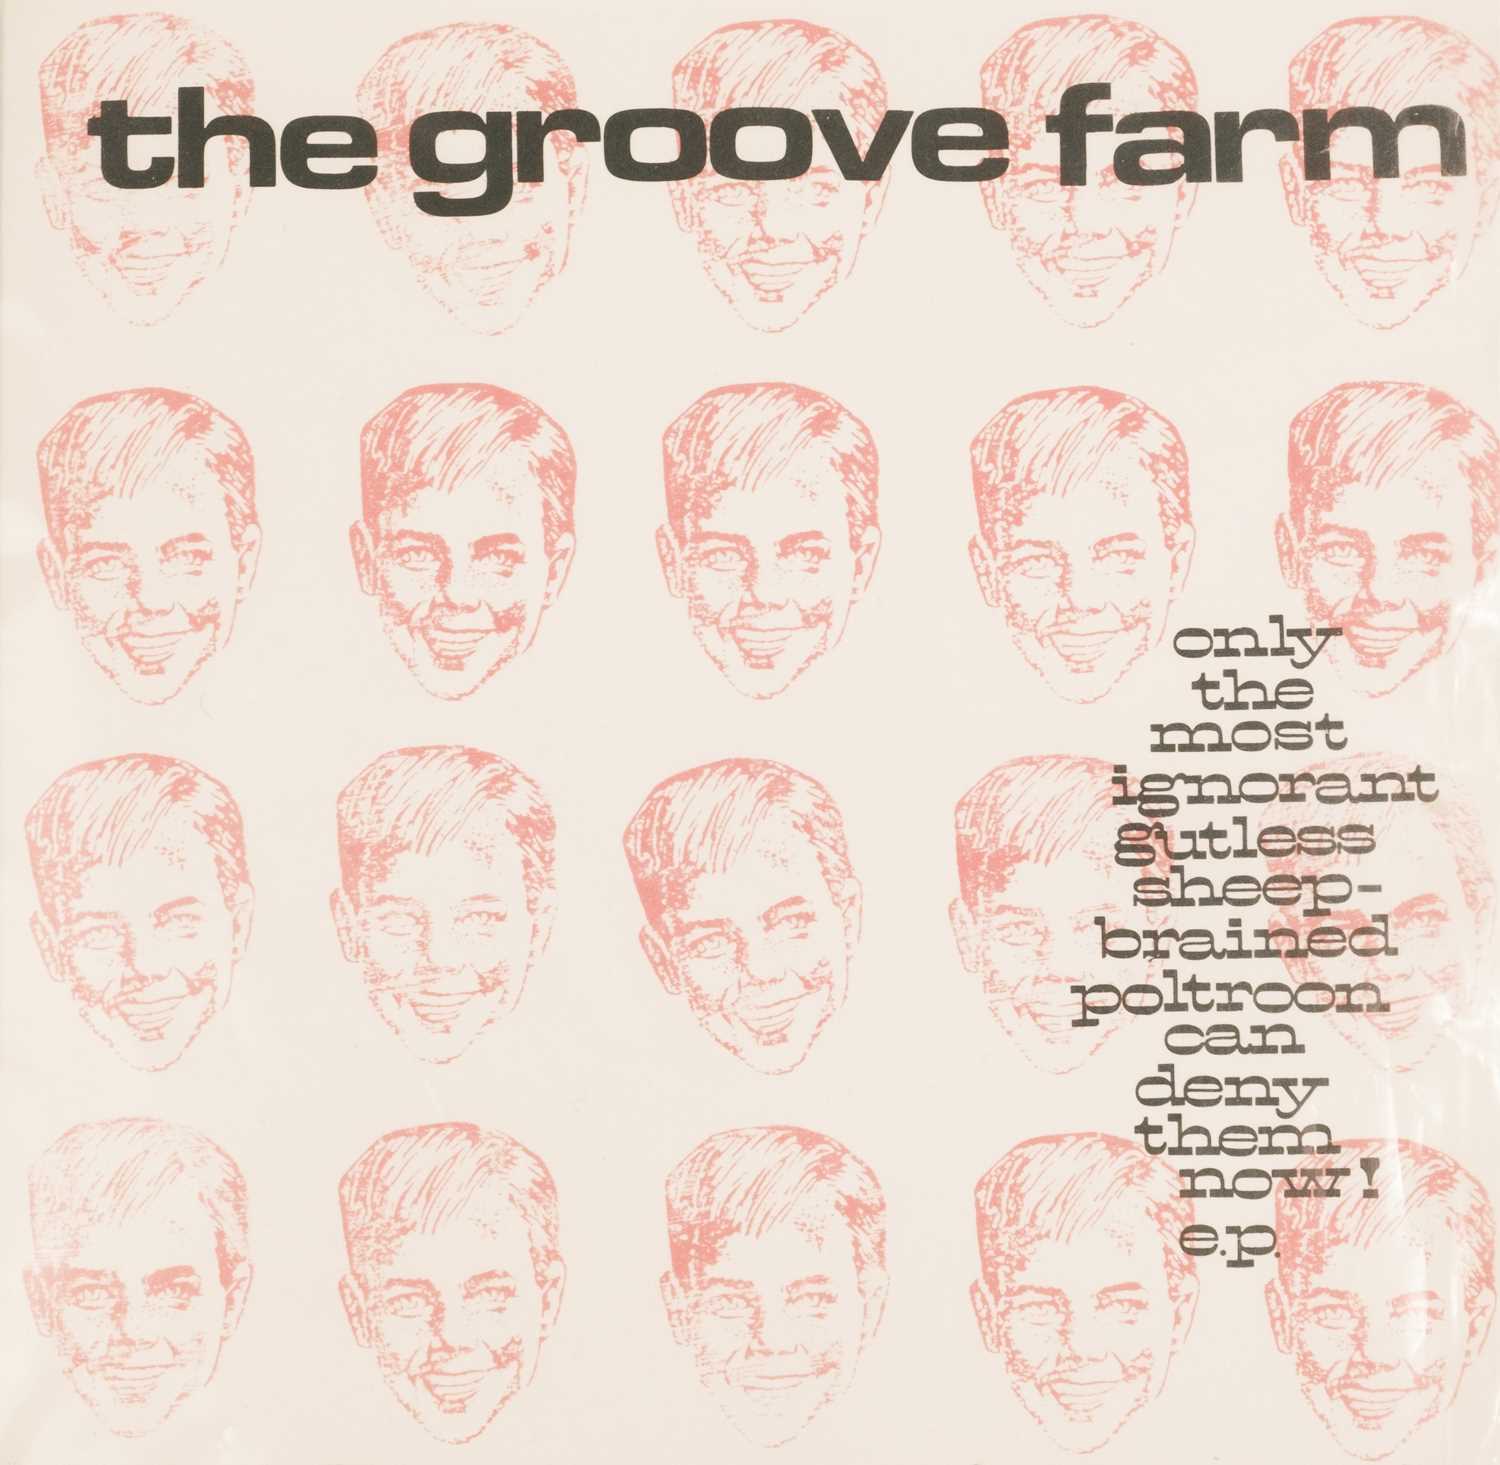 The Groove Farm LP, EP, and single collection. - Image 7 of 7